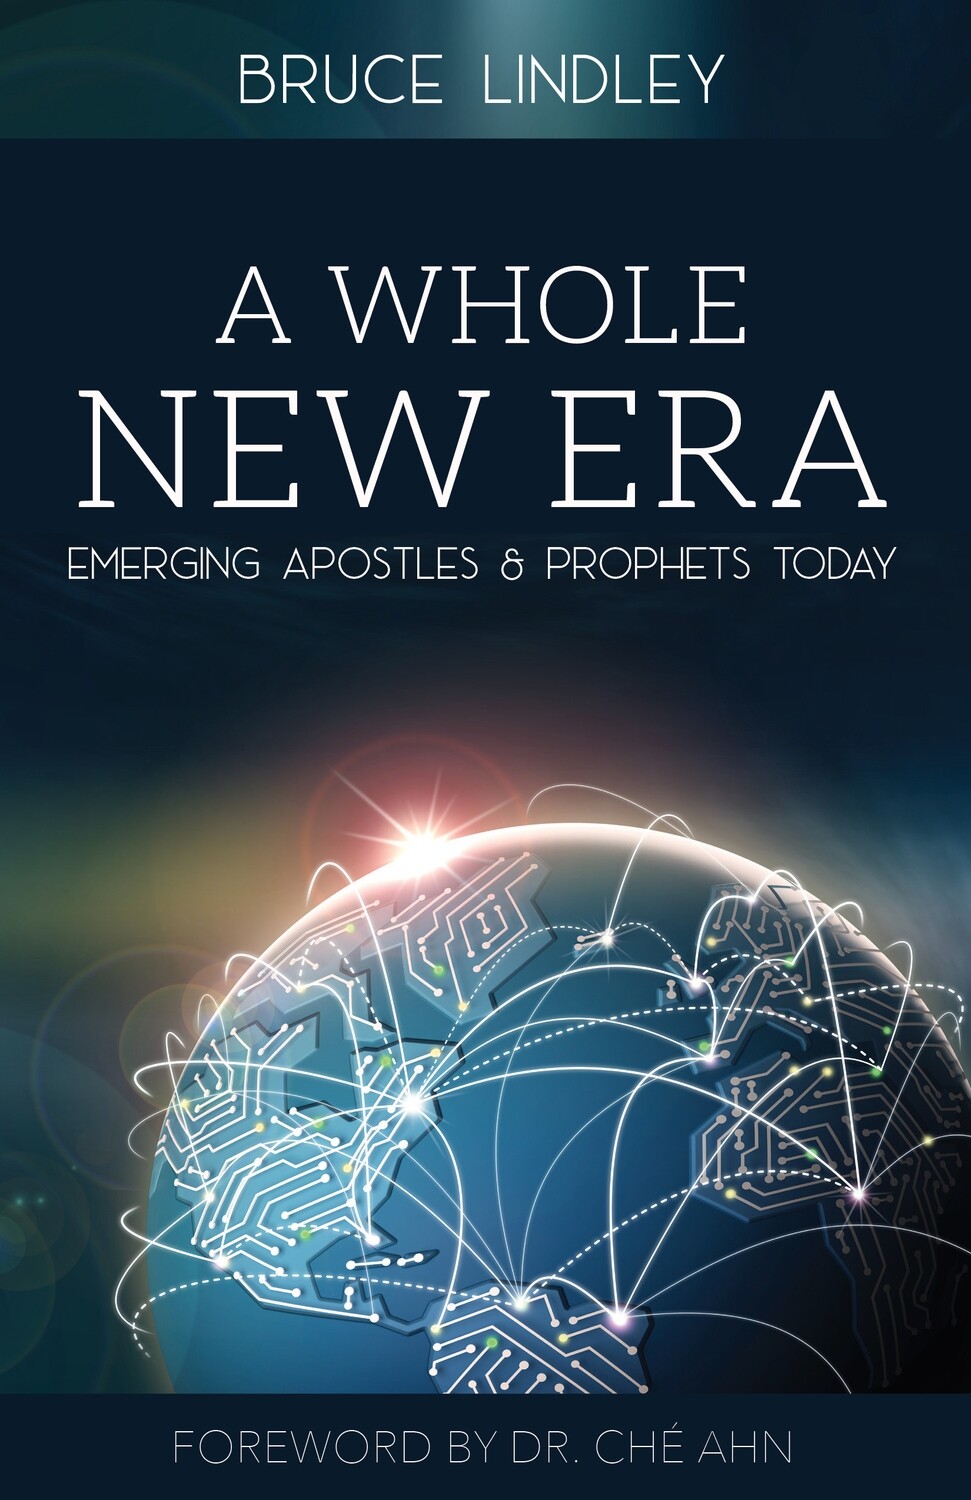 NEW BOOK - Bruce Lindley's
"A Whole New Era - Emerging Apostles & Prophets Today" - Forward by Dr. Che Ahn